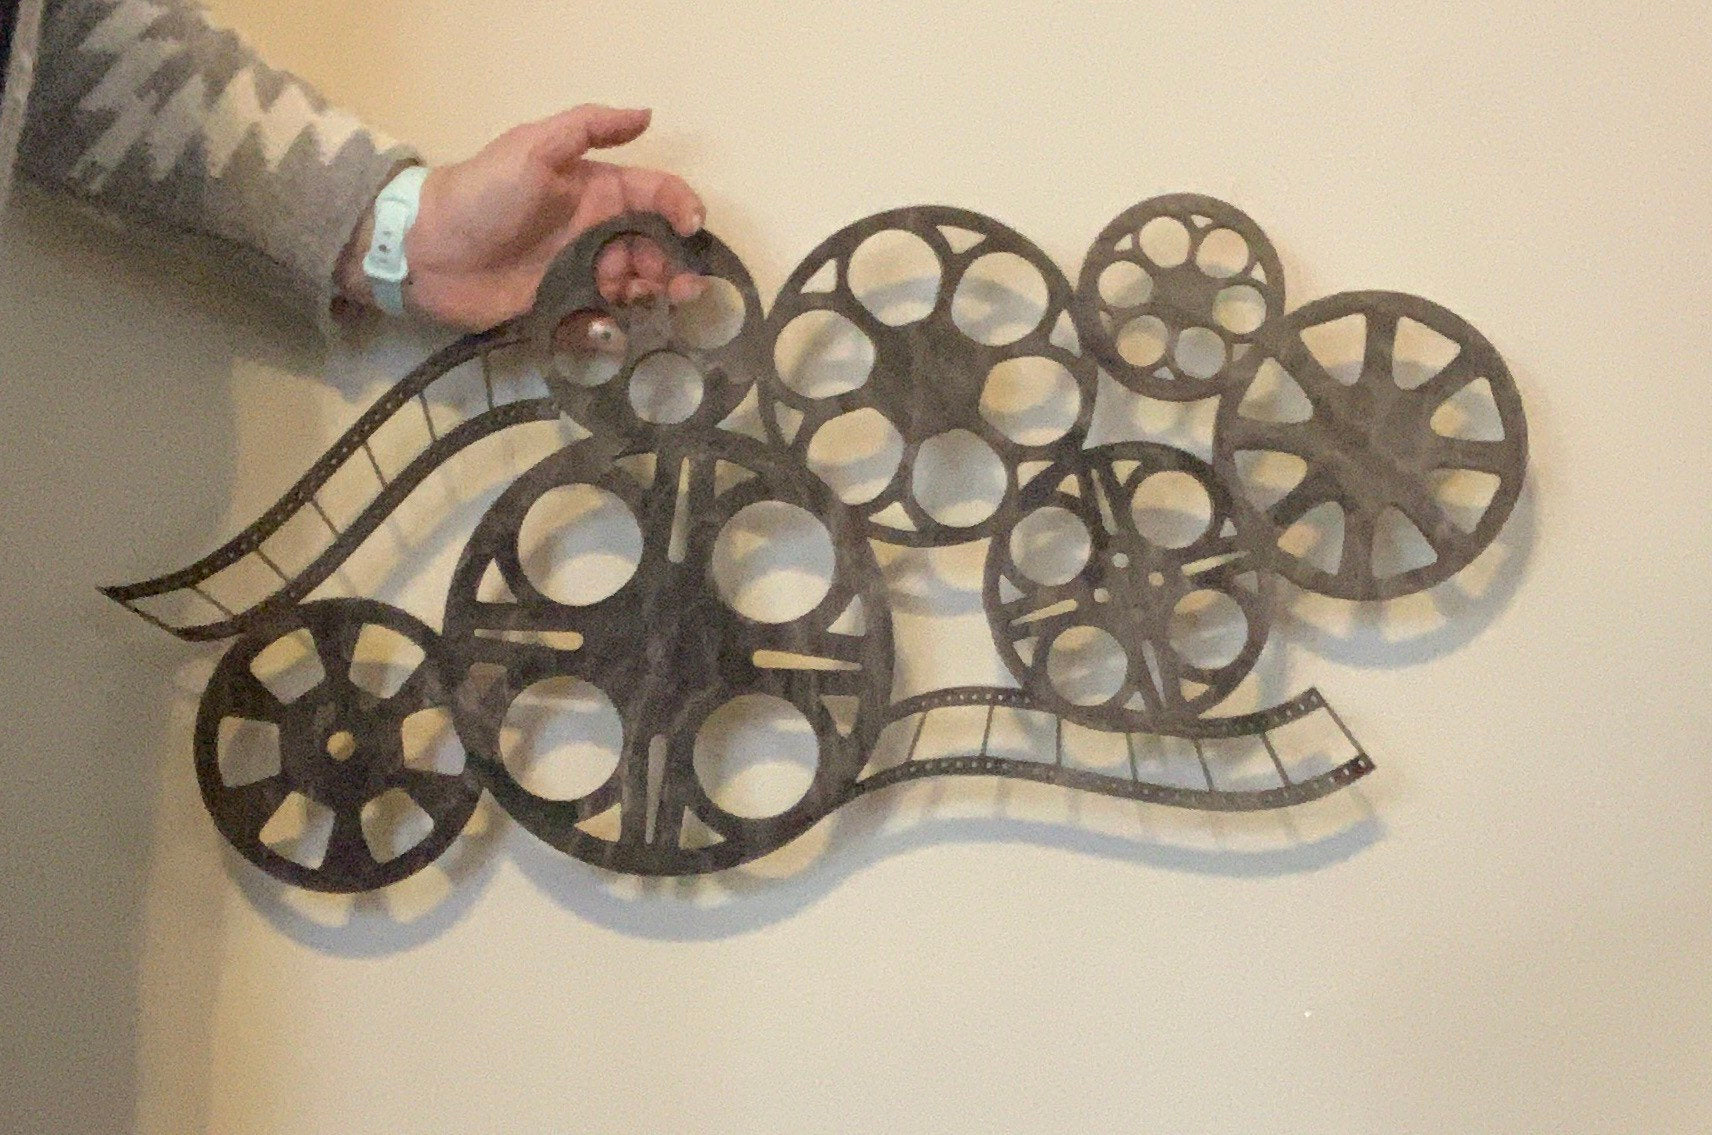 Movie Reels and Film Collage Laser Cut Wood Wall Hanging